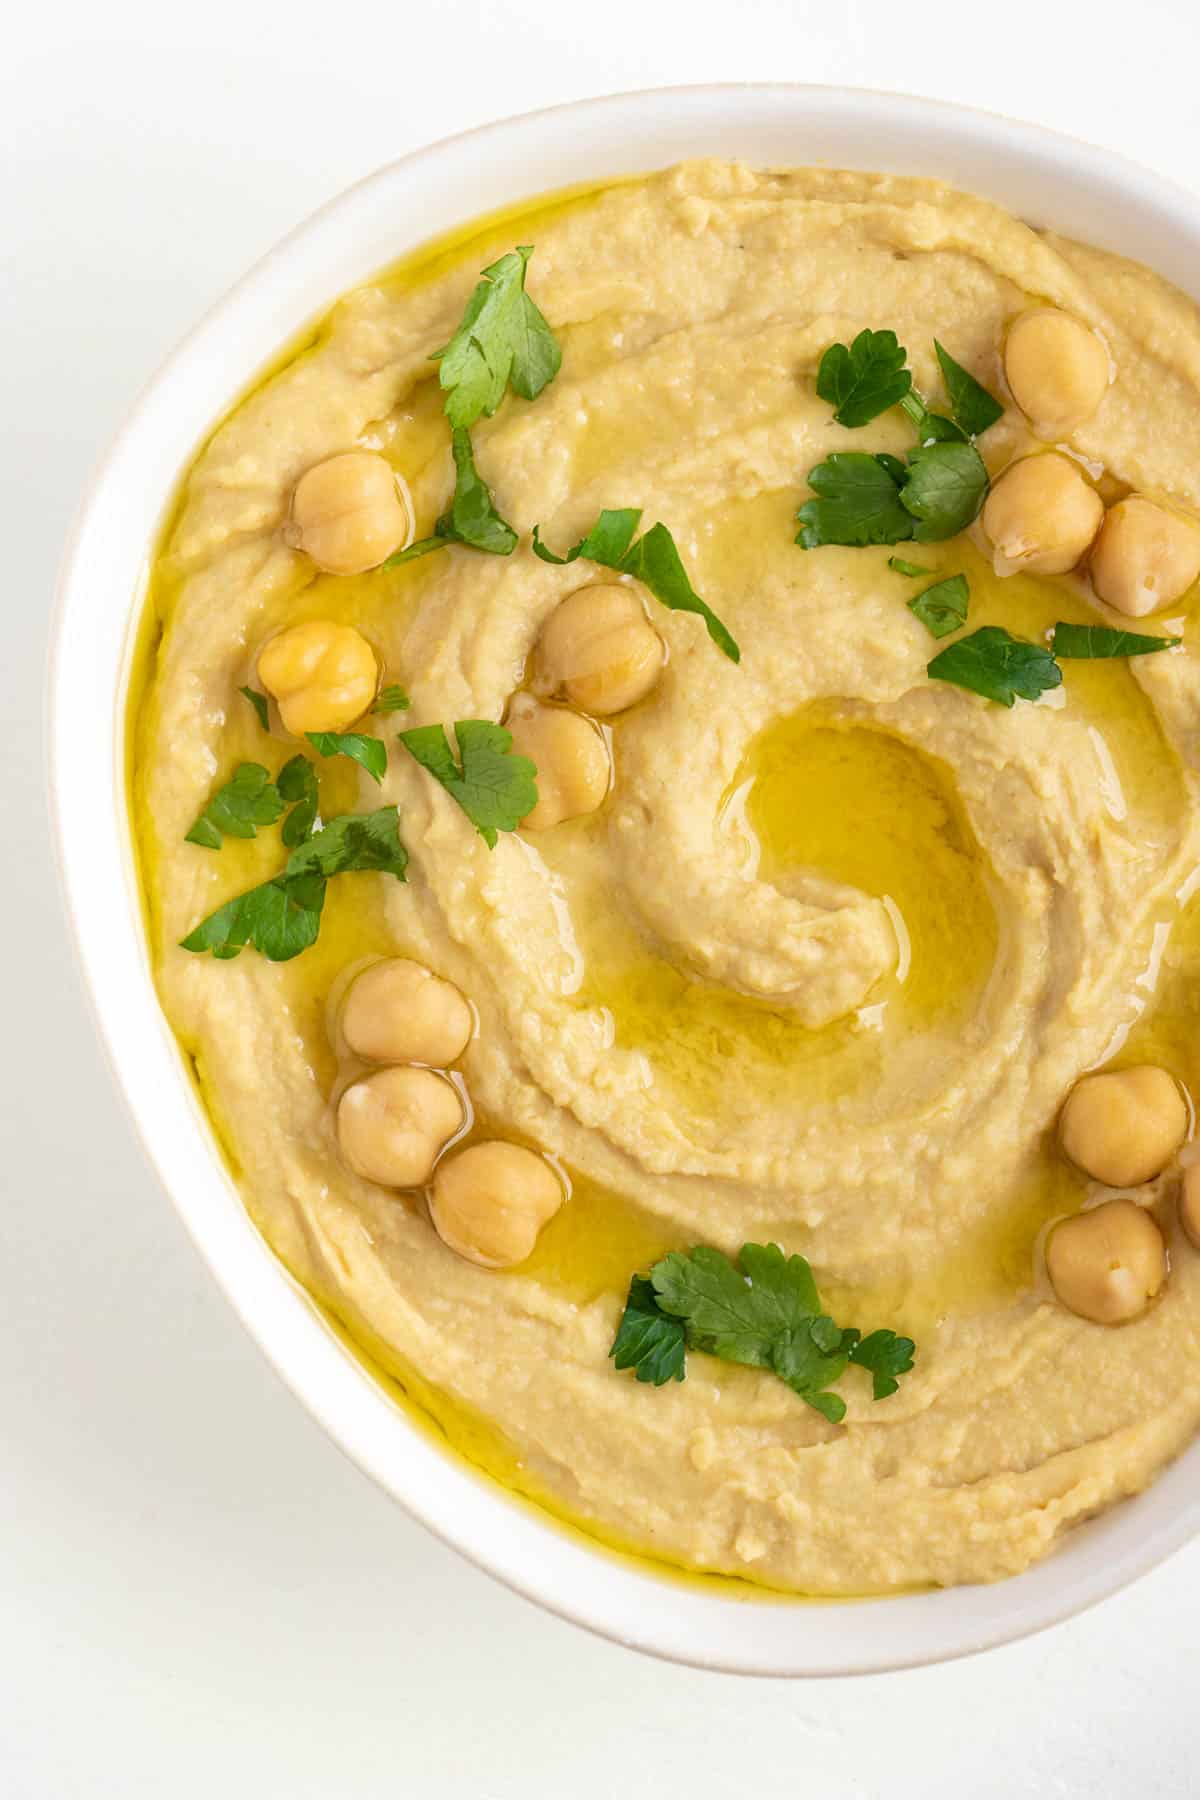 roasted garlic hummus with garbanzo beans, parsley, and olive oil on top